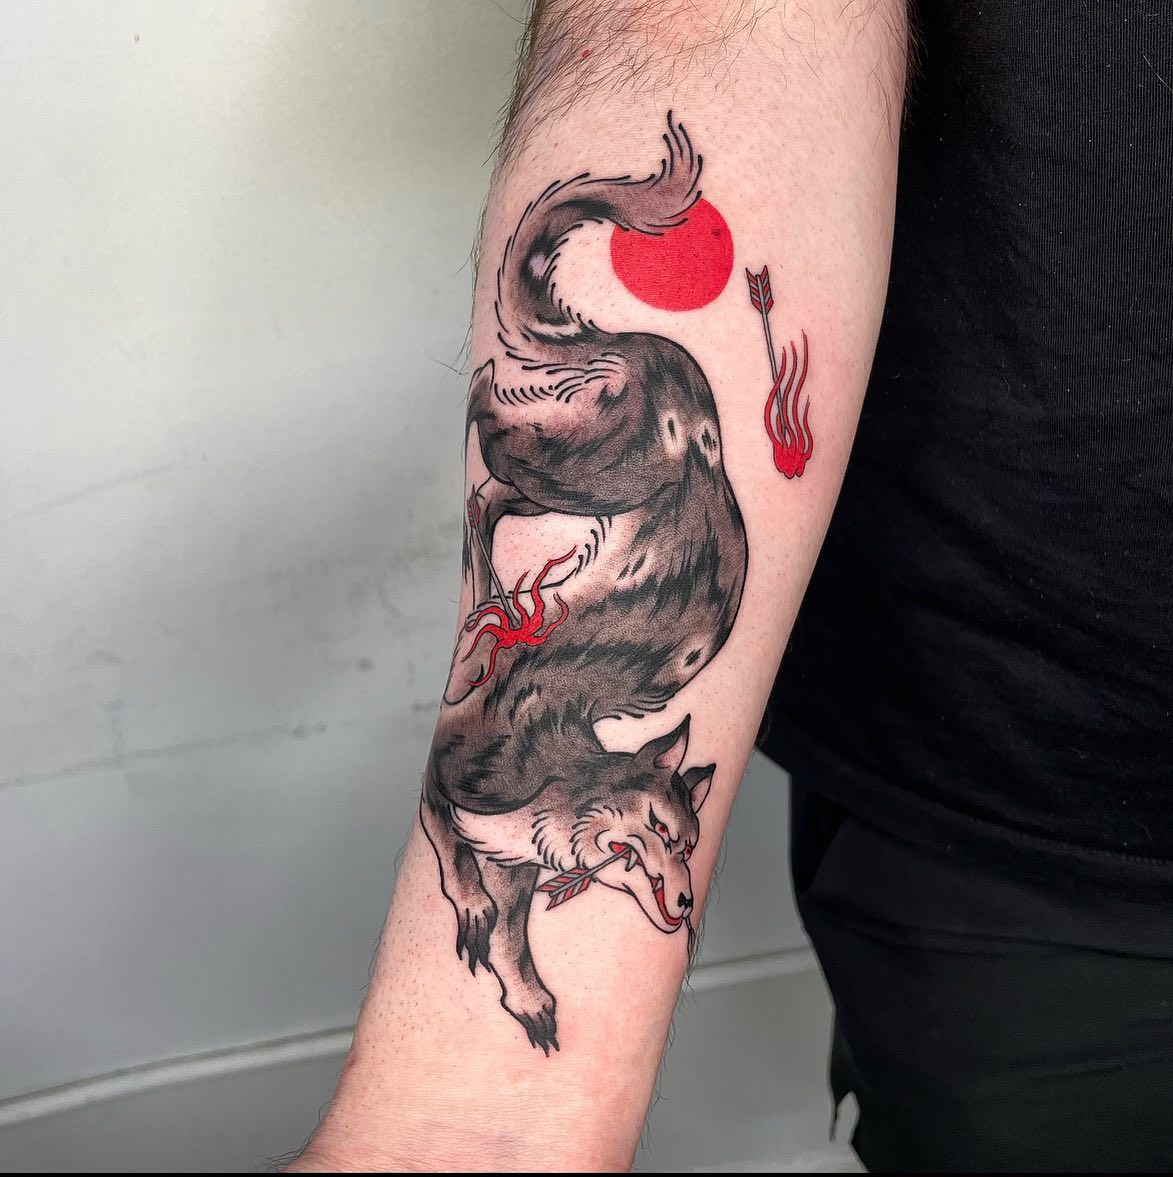 Except for the other wolf tattoos, this design is highly influenced from traditional Japanese art.